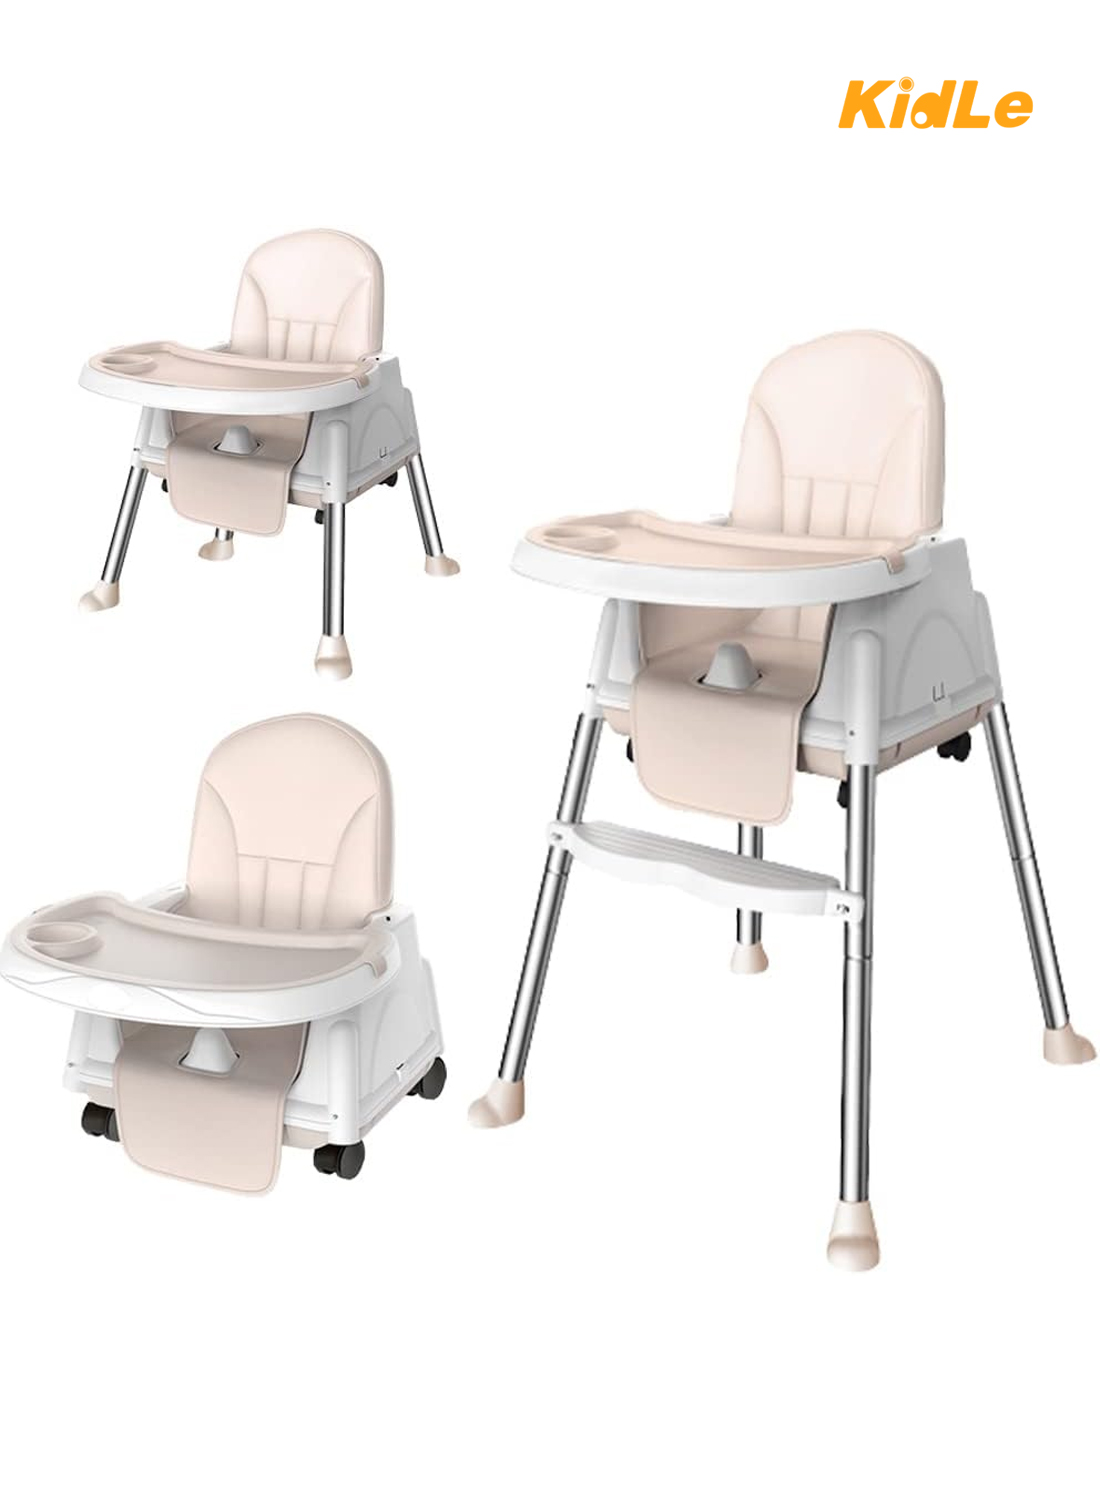 Baby highchair For Eating Foldable Portable Household Multifunctional Portable Baby Dining Car With Roller Wheels